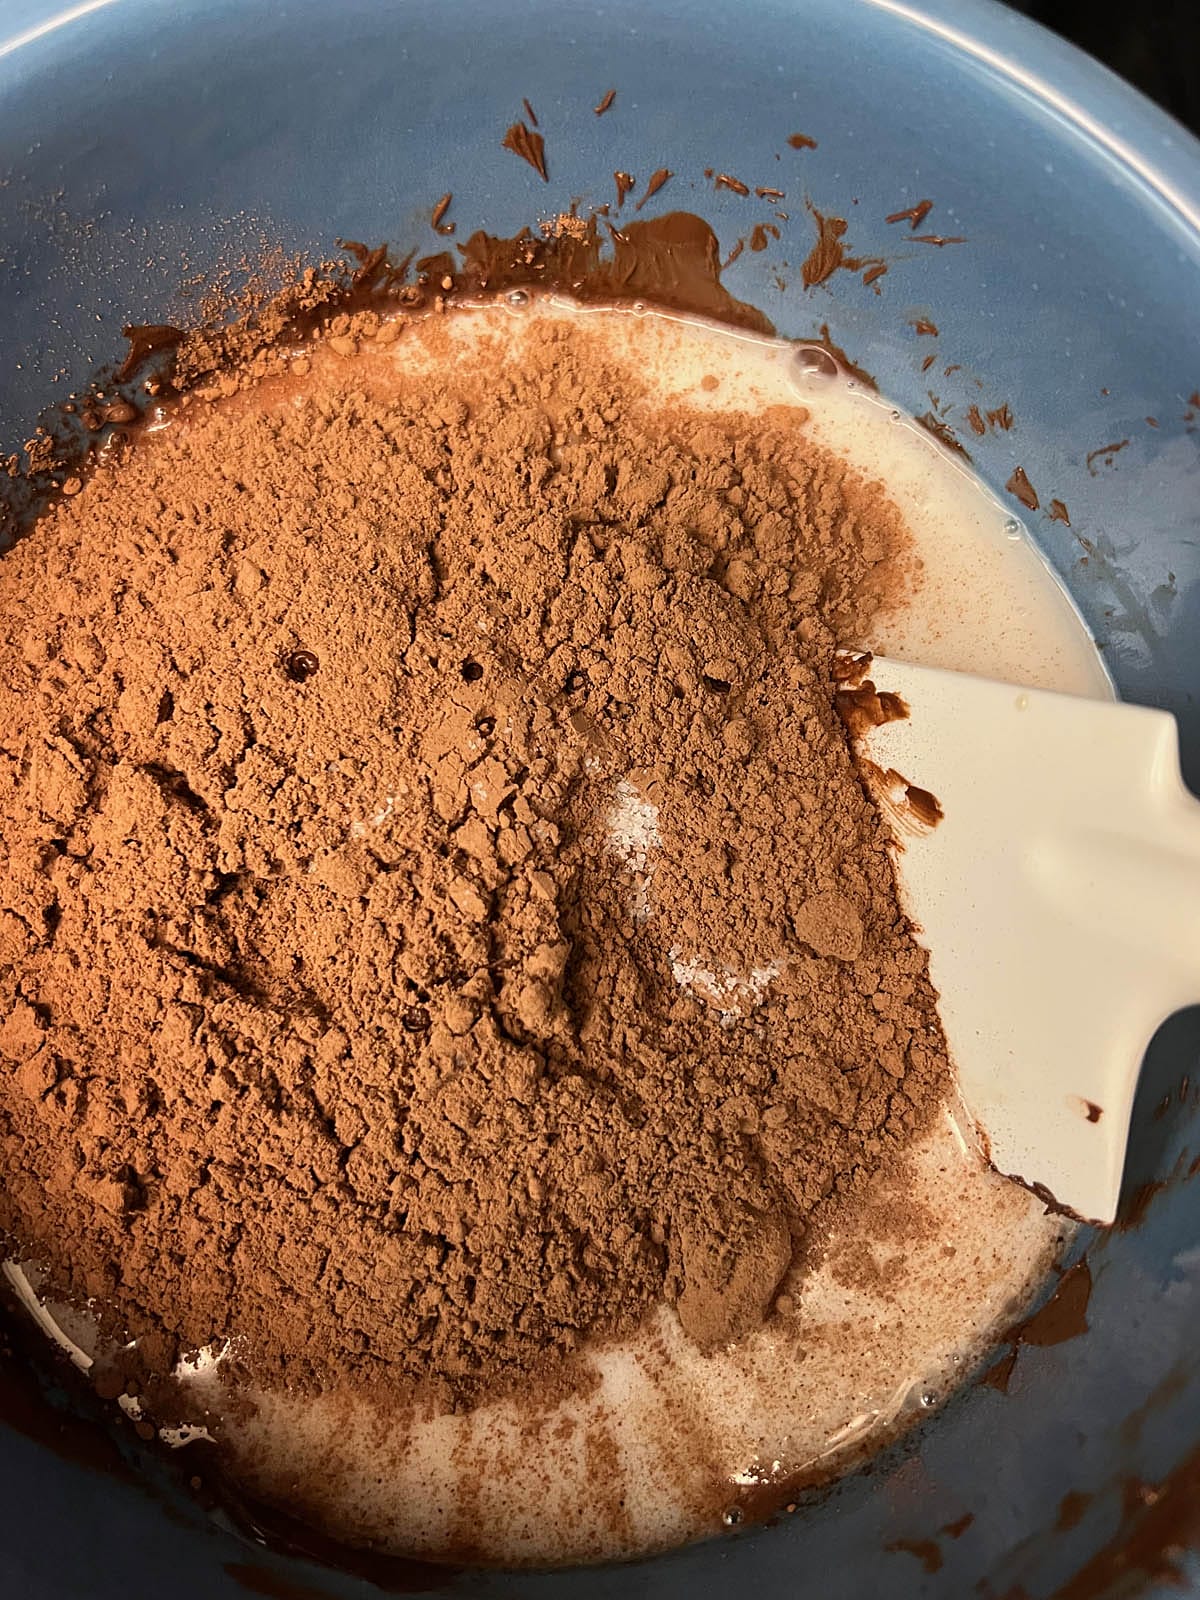 The rest of ingredients added to melted chocolate in a bowl.